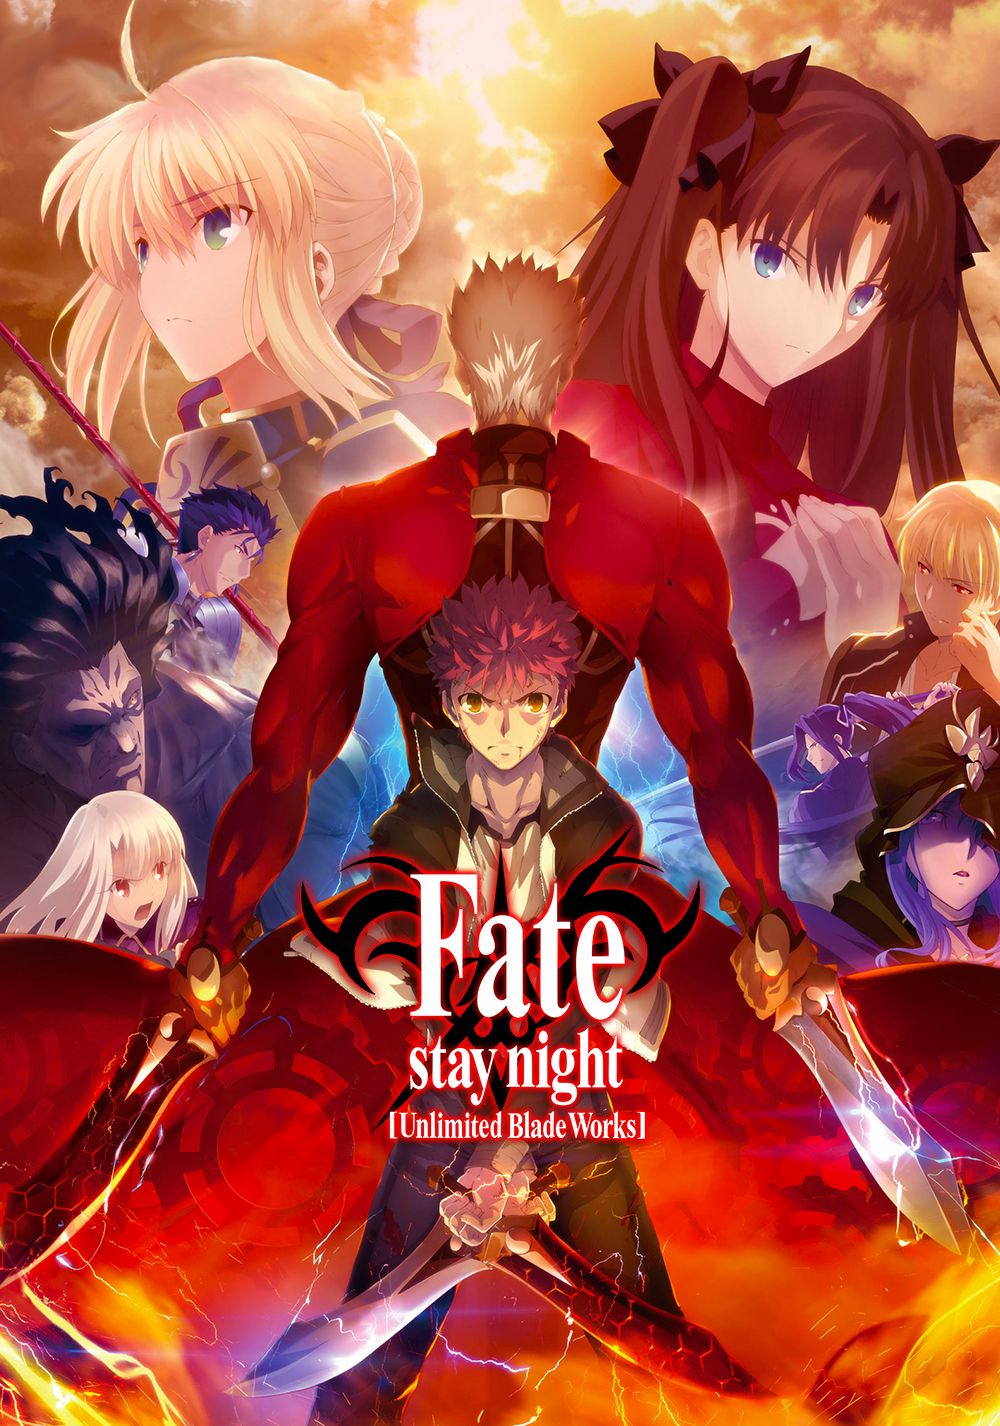 Fate/stay night[Unlimited Blade Works] Blu-ray Disc Box Standard 